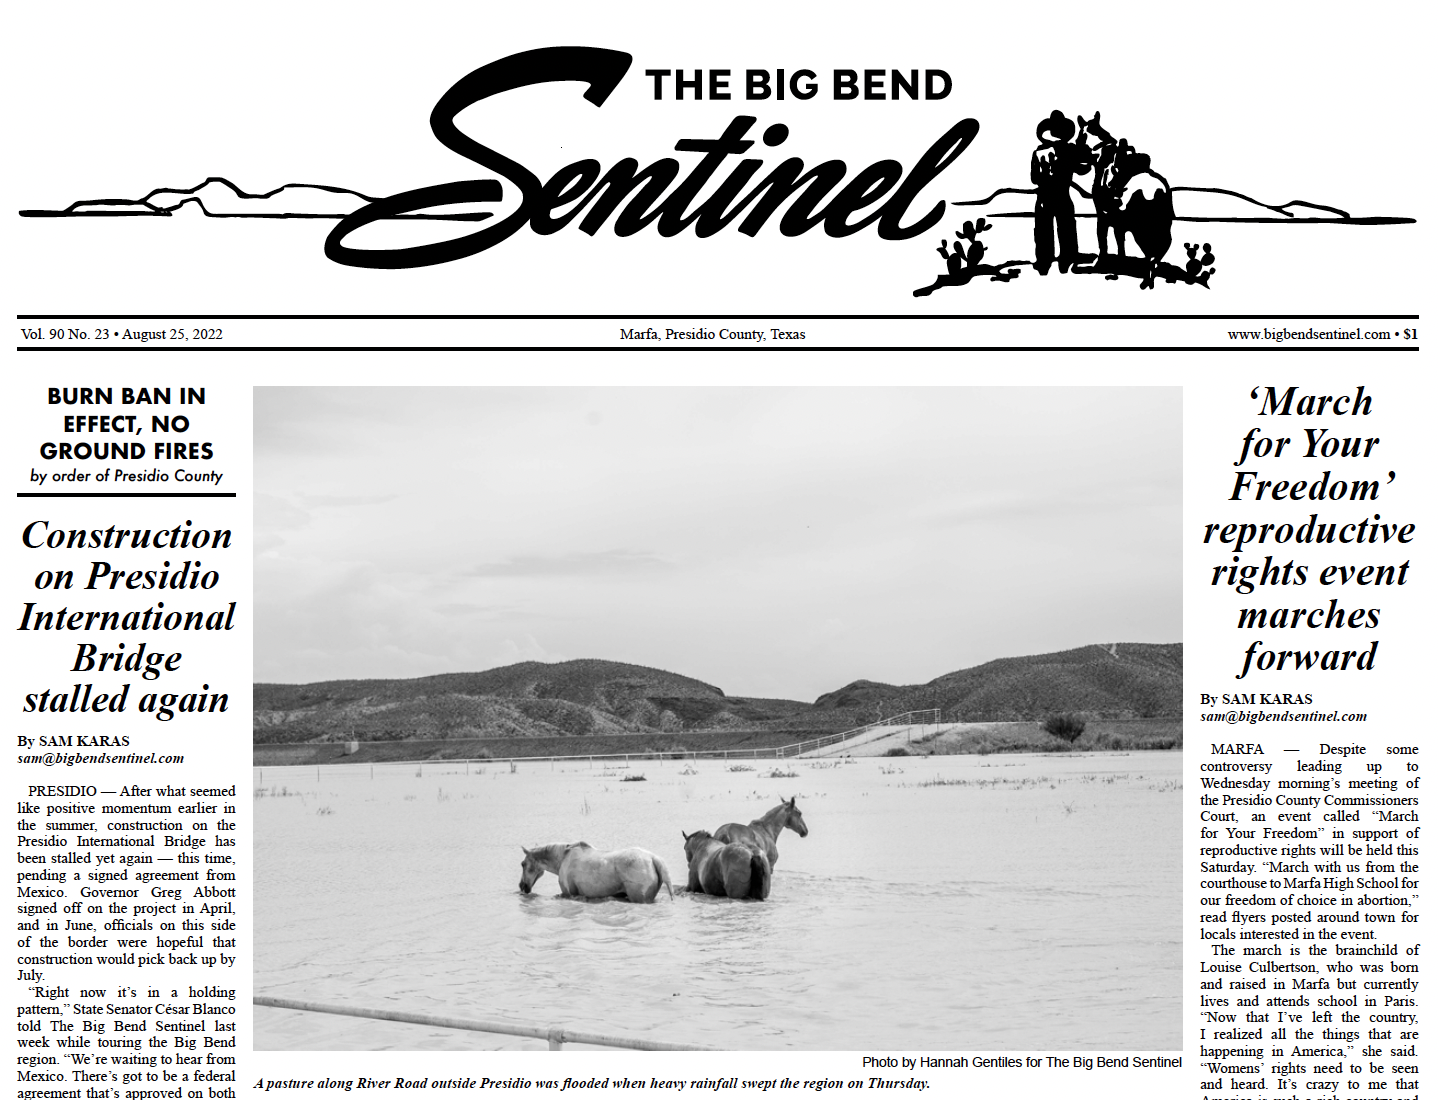 Relational loves local media. The Big Bend Sentinel out of Marfa, Presidio County, Texas. https://bigbendsentinel.com/